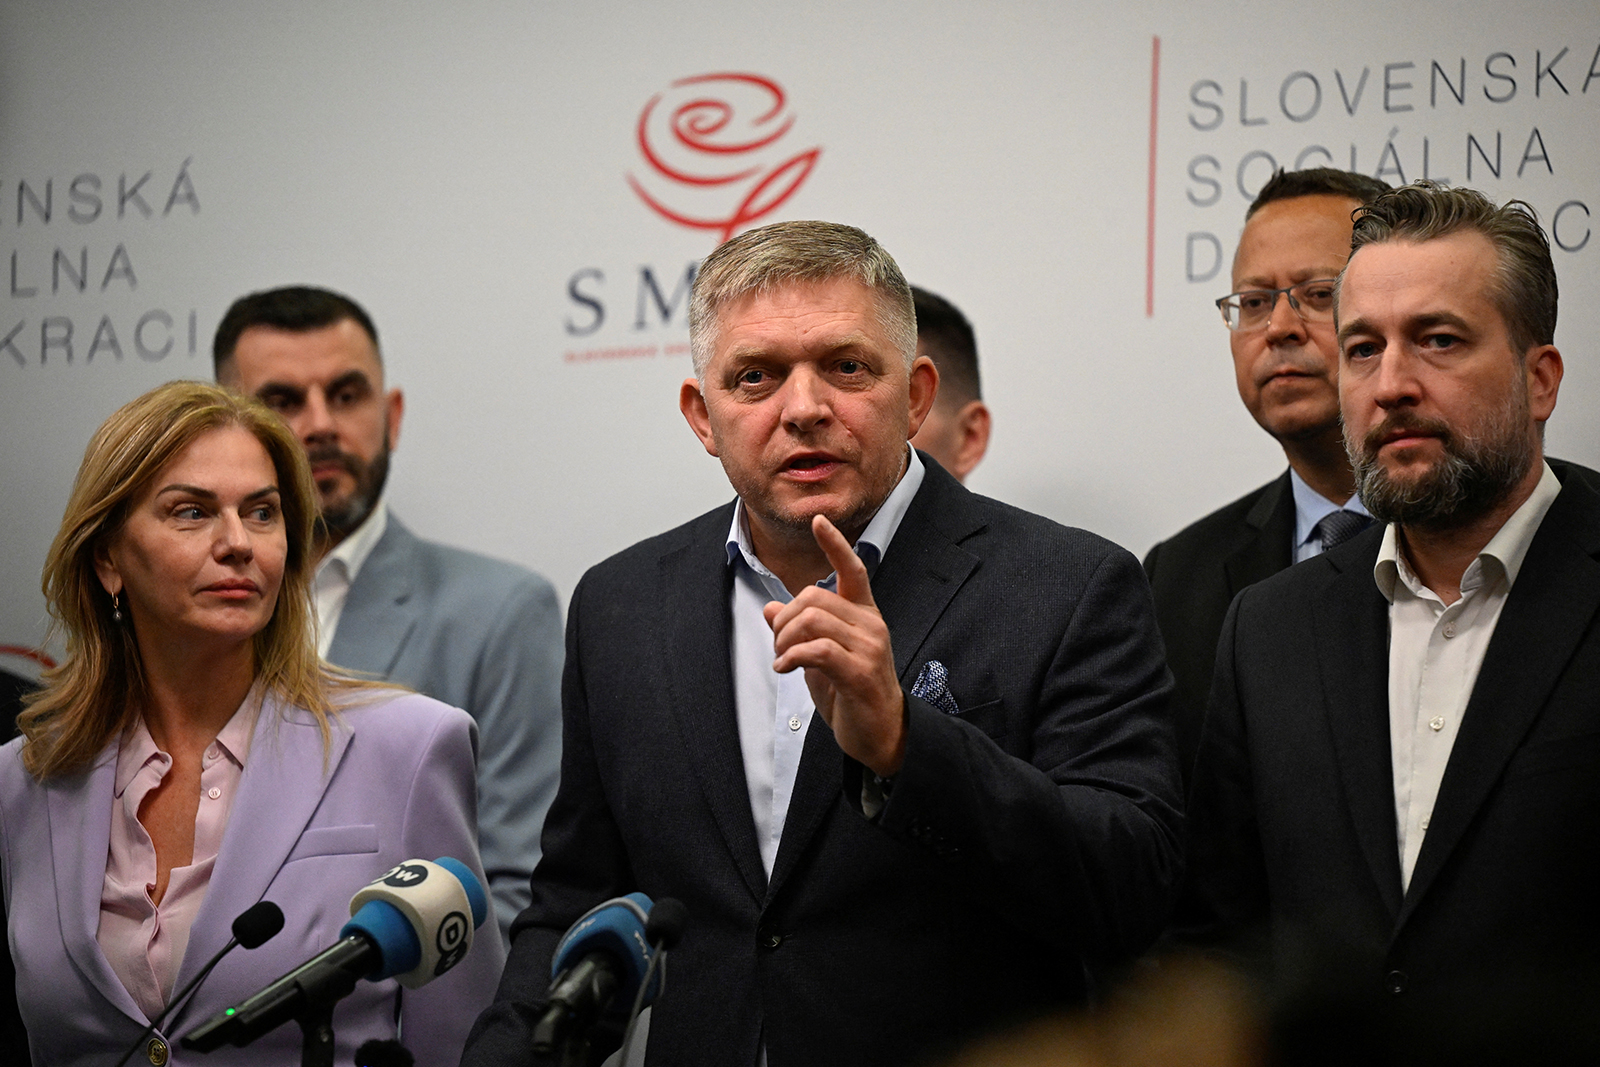 Robert Fico speaks during a press conference after the country's early parliamentary elections, in Bratislava, Slovakia, on October 1.